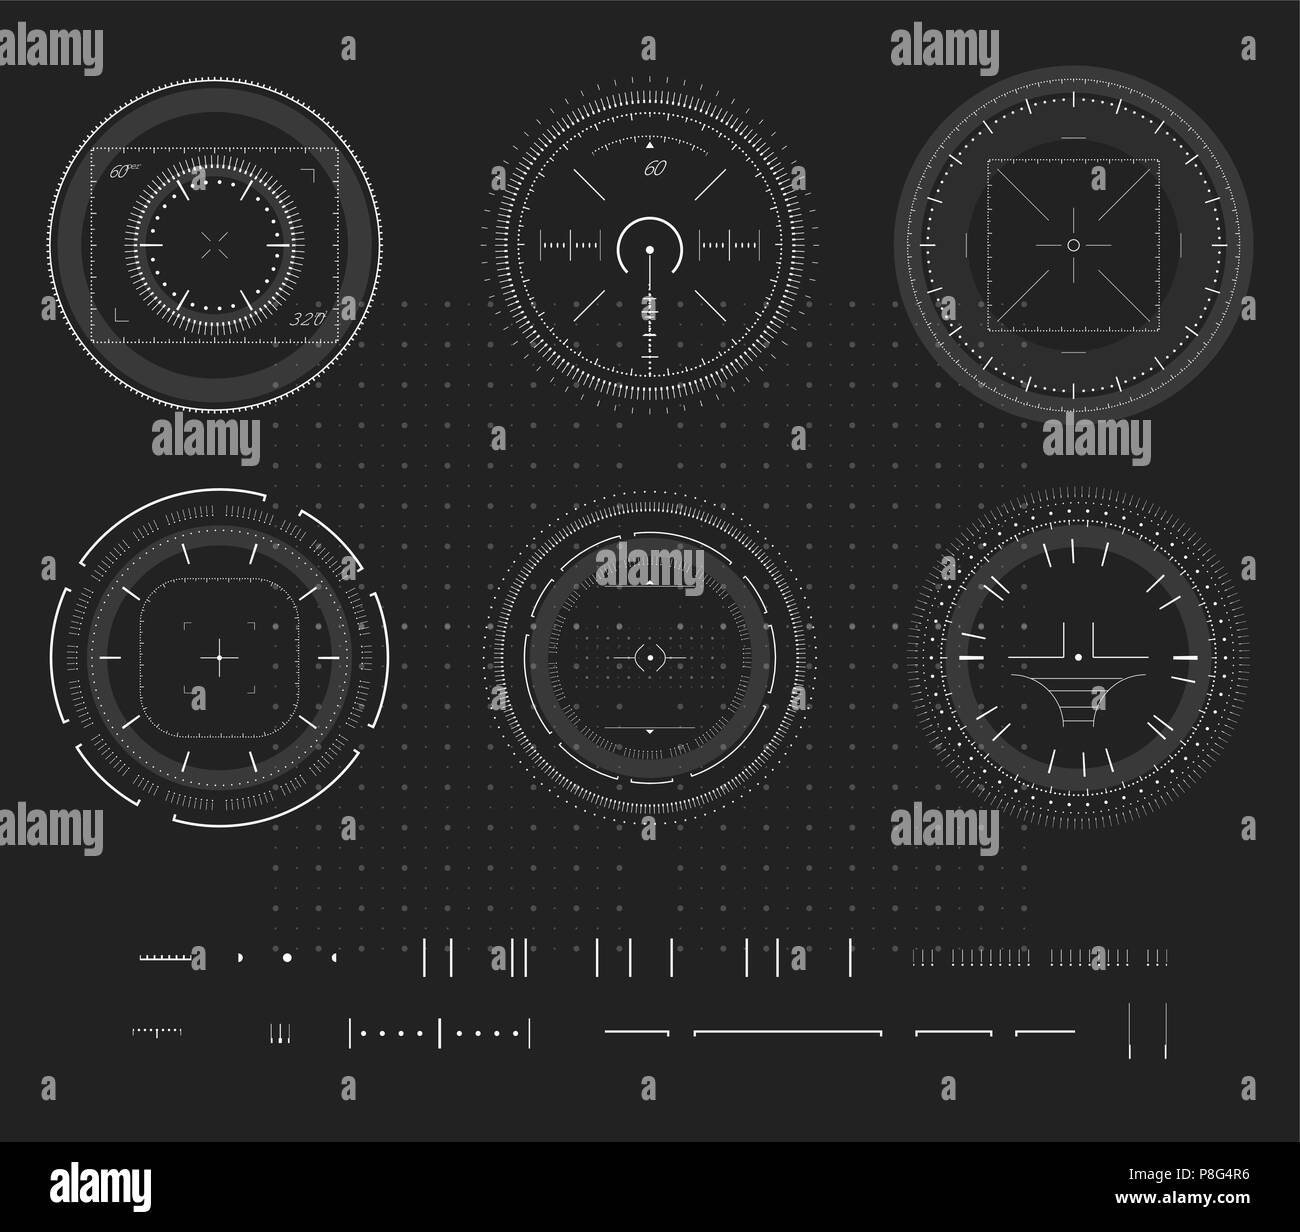 Sniper aim, digital smart device display, HUD infographic, design element. Shooting range, aim, target icon collection. Vector abstract logo template collection, illustration on black background. Stock Vector